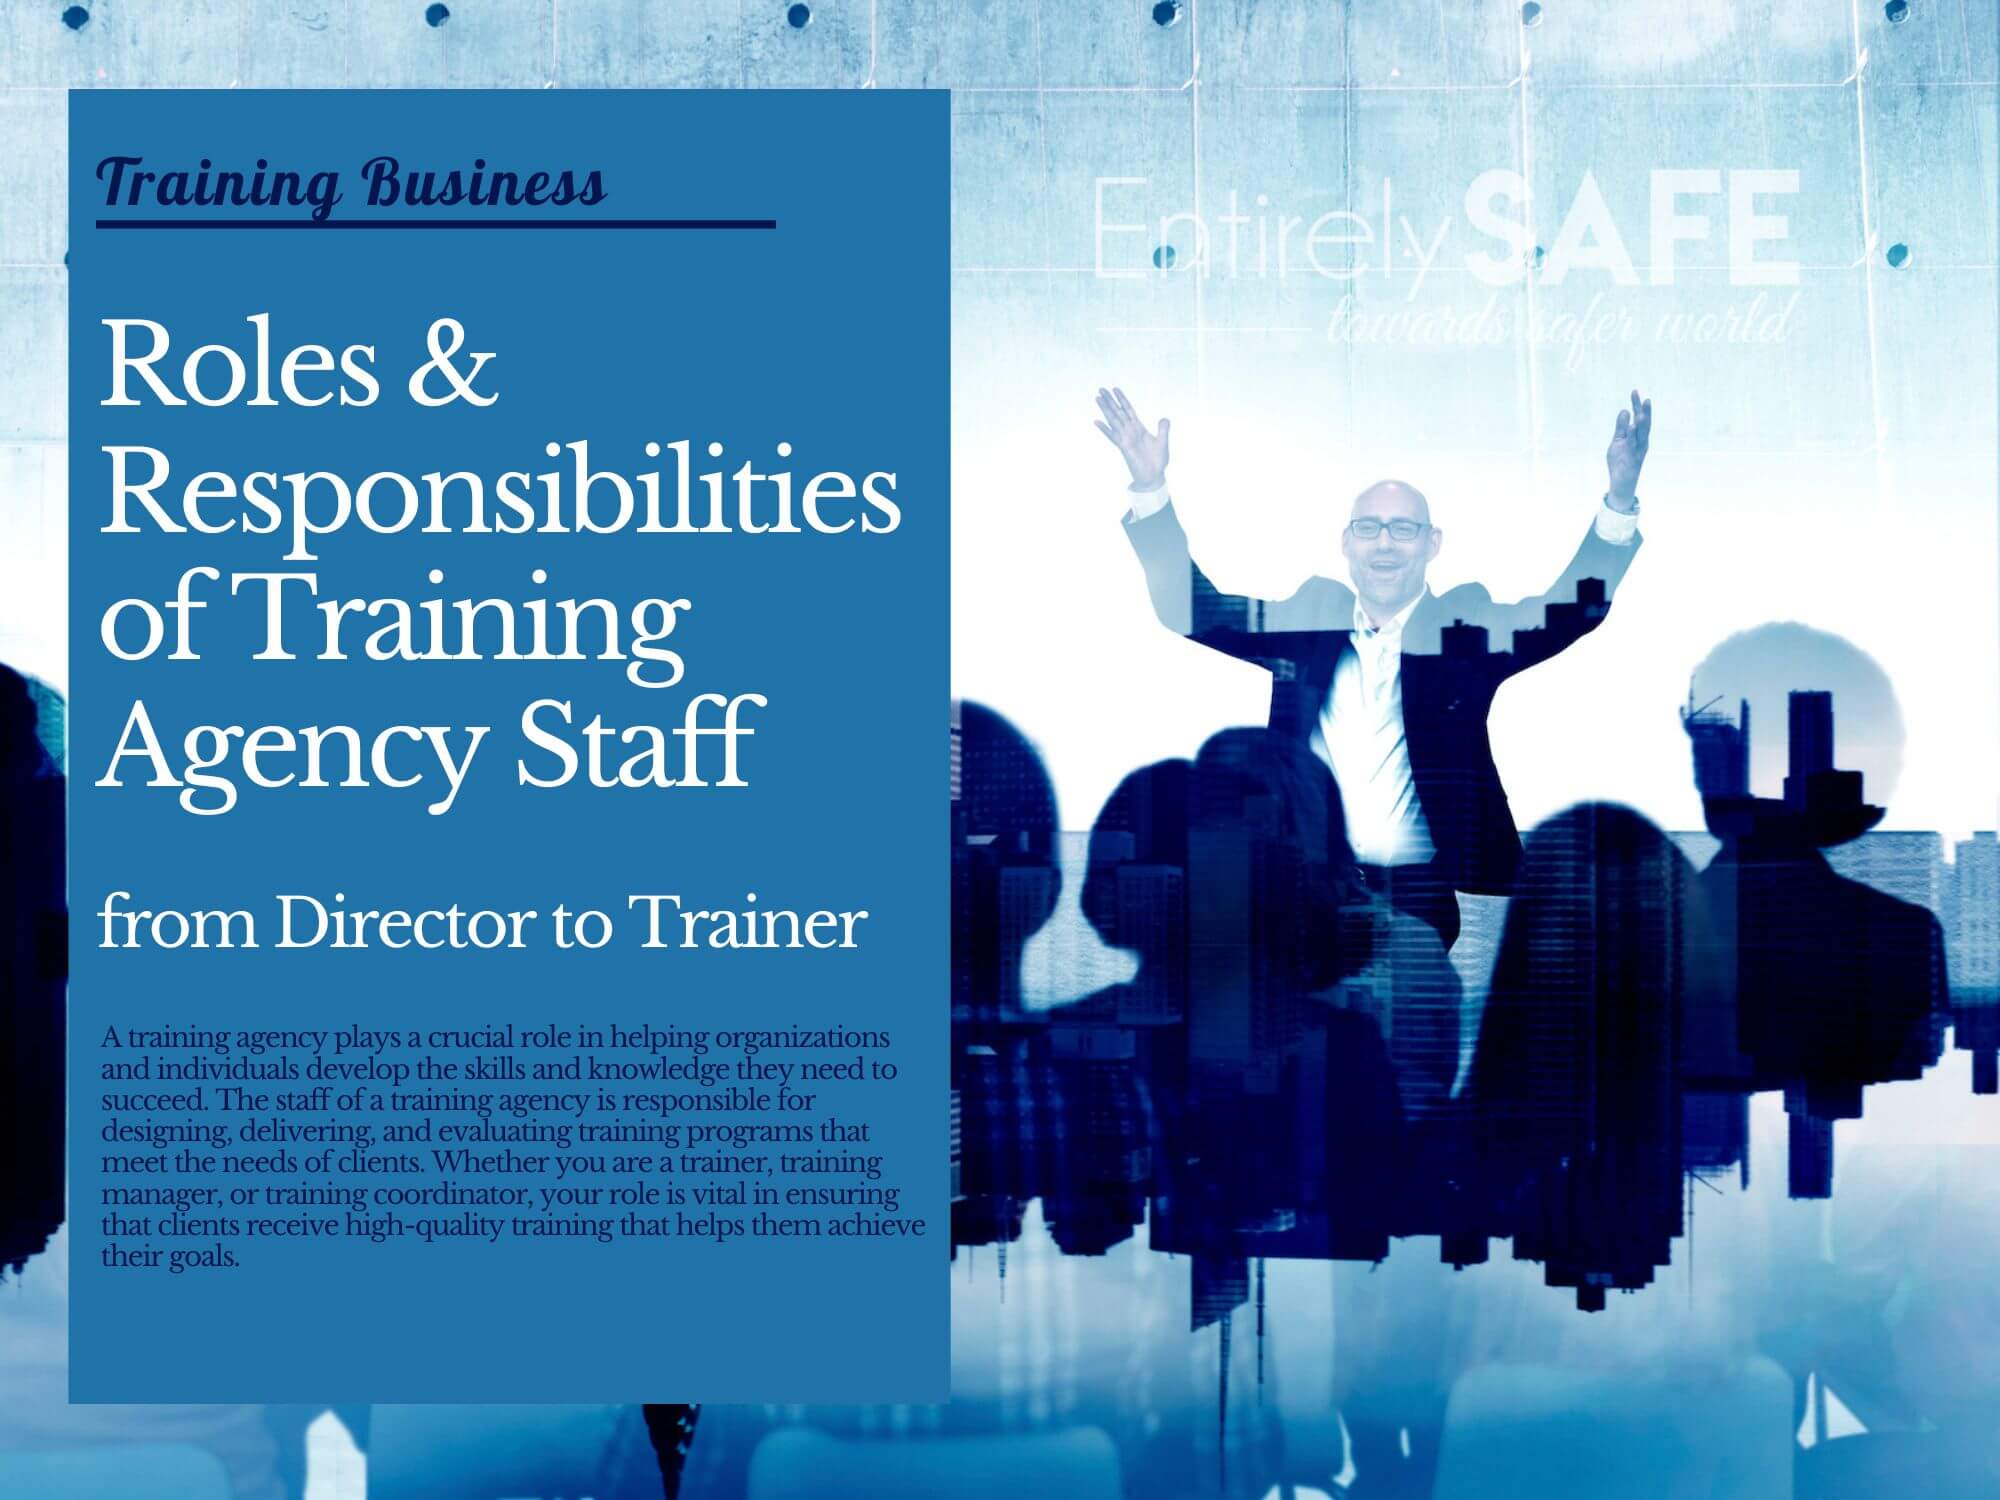 Key Roles and Responsibilities of Training Agency Staff, from Director to Trainer